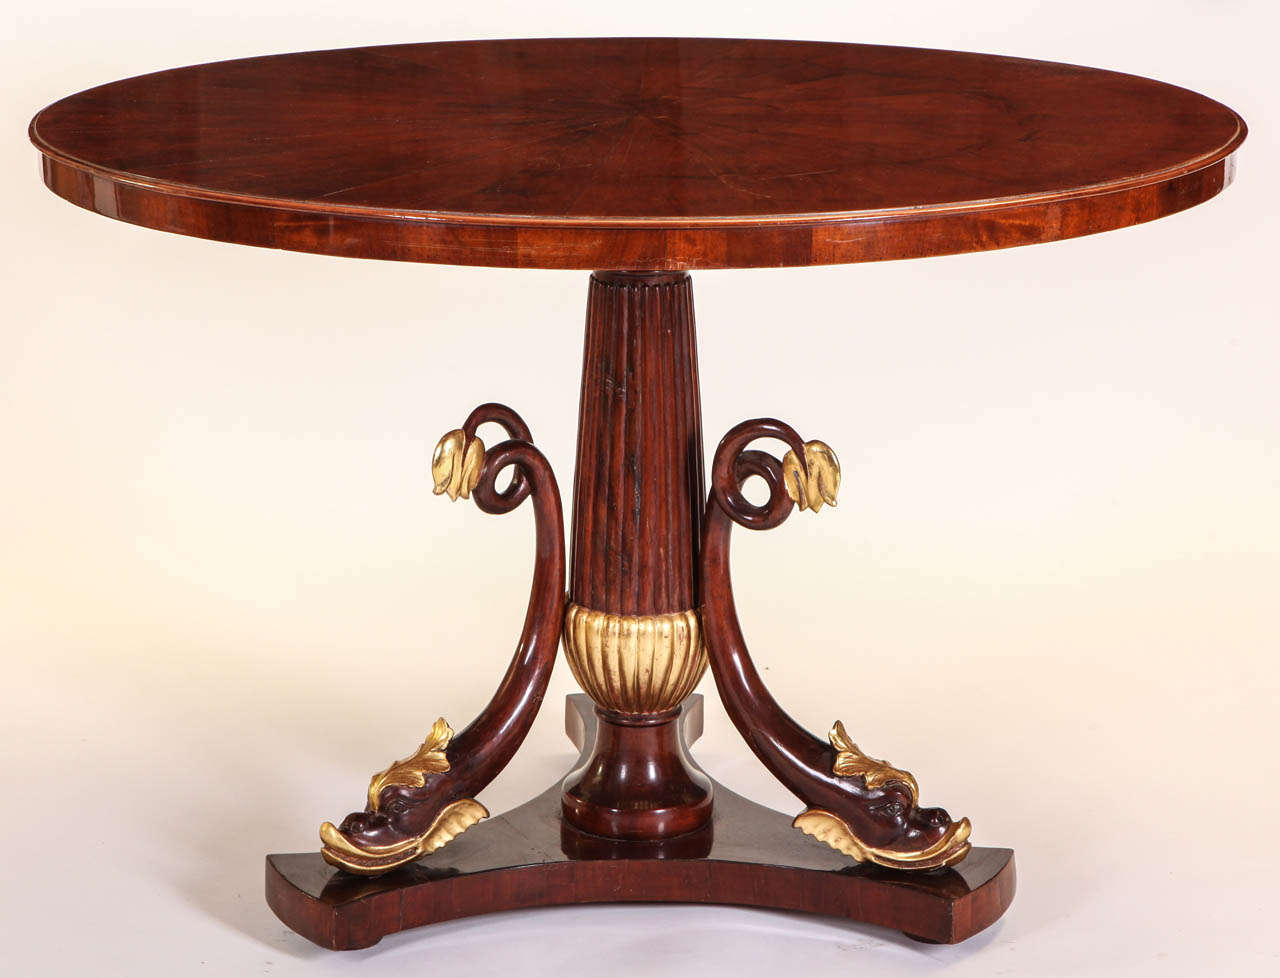 19th Century Italian Mahogany and Parcel-Gilt Centre Table, 1830 For Sale